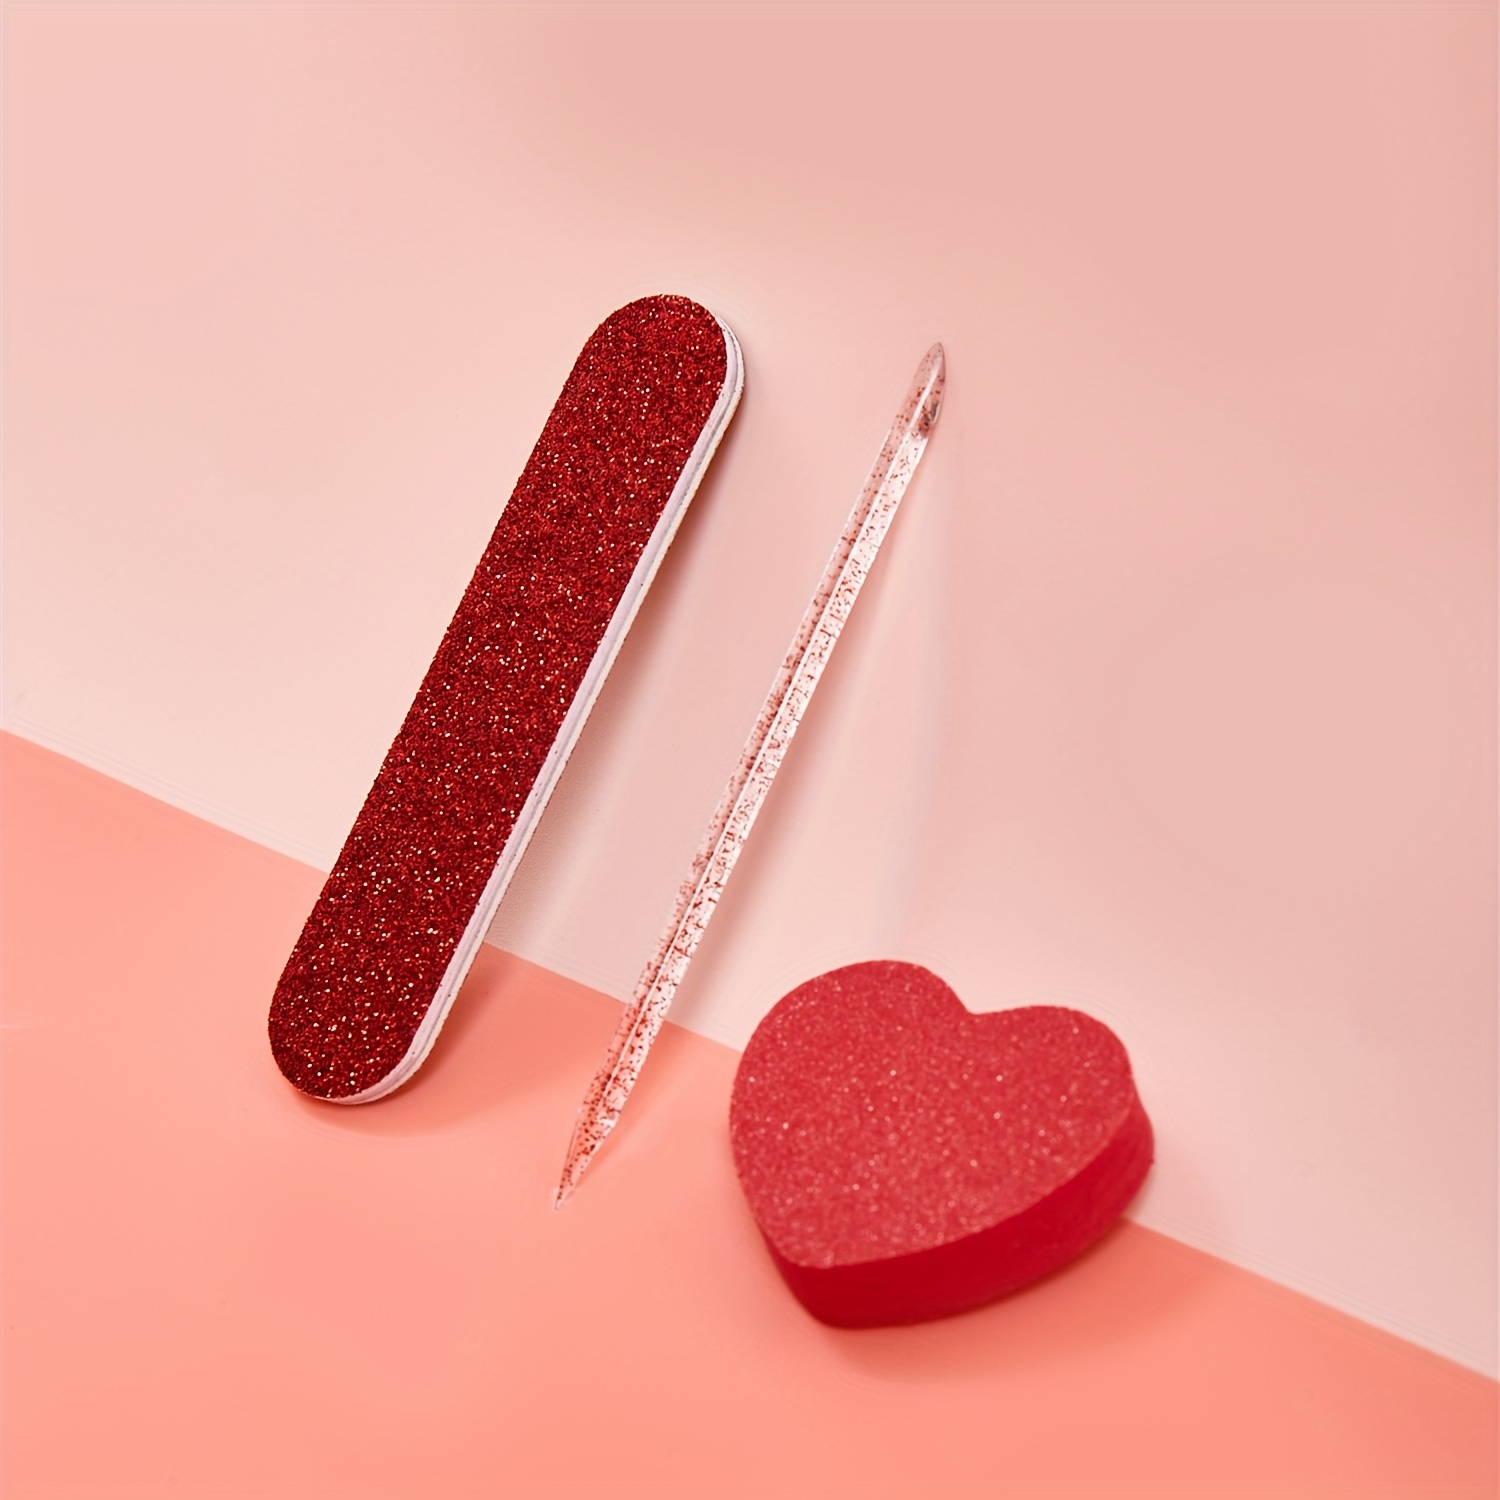 

Glitter Cuticle Tool Set - Hypoallergenic Manicure Kit With Crystal Rhinestone Stick, Heart-shaped Tofu Block, And Double-sided Emery Board Nail File (3-piece)